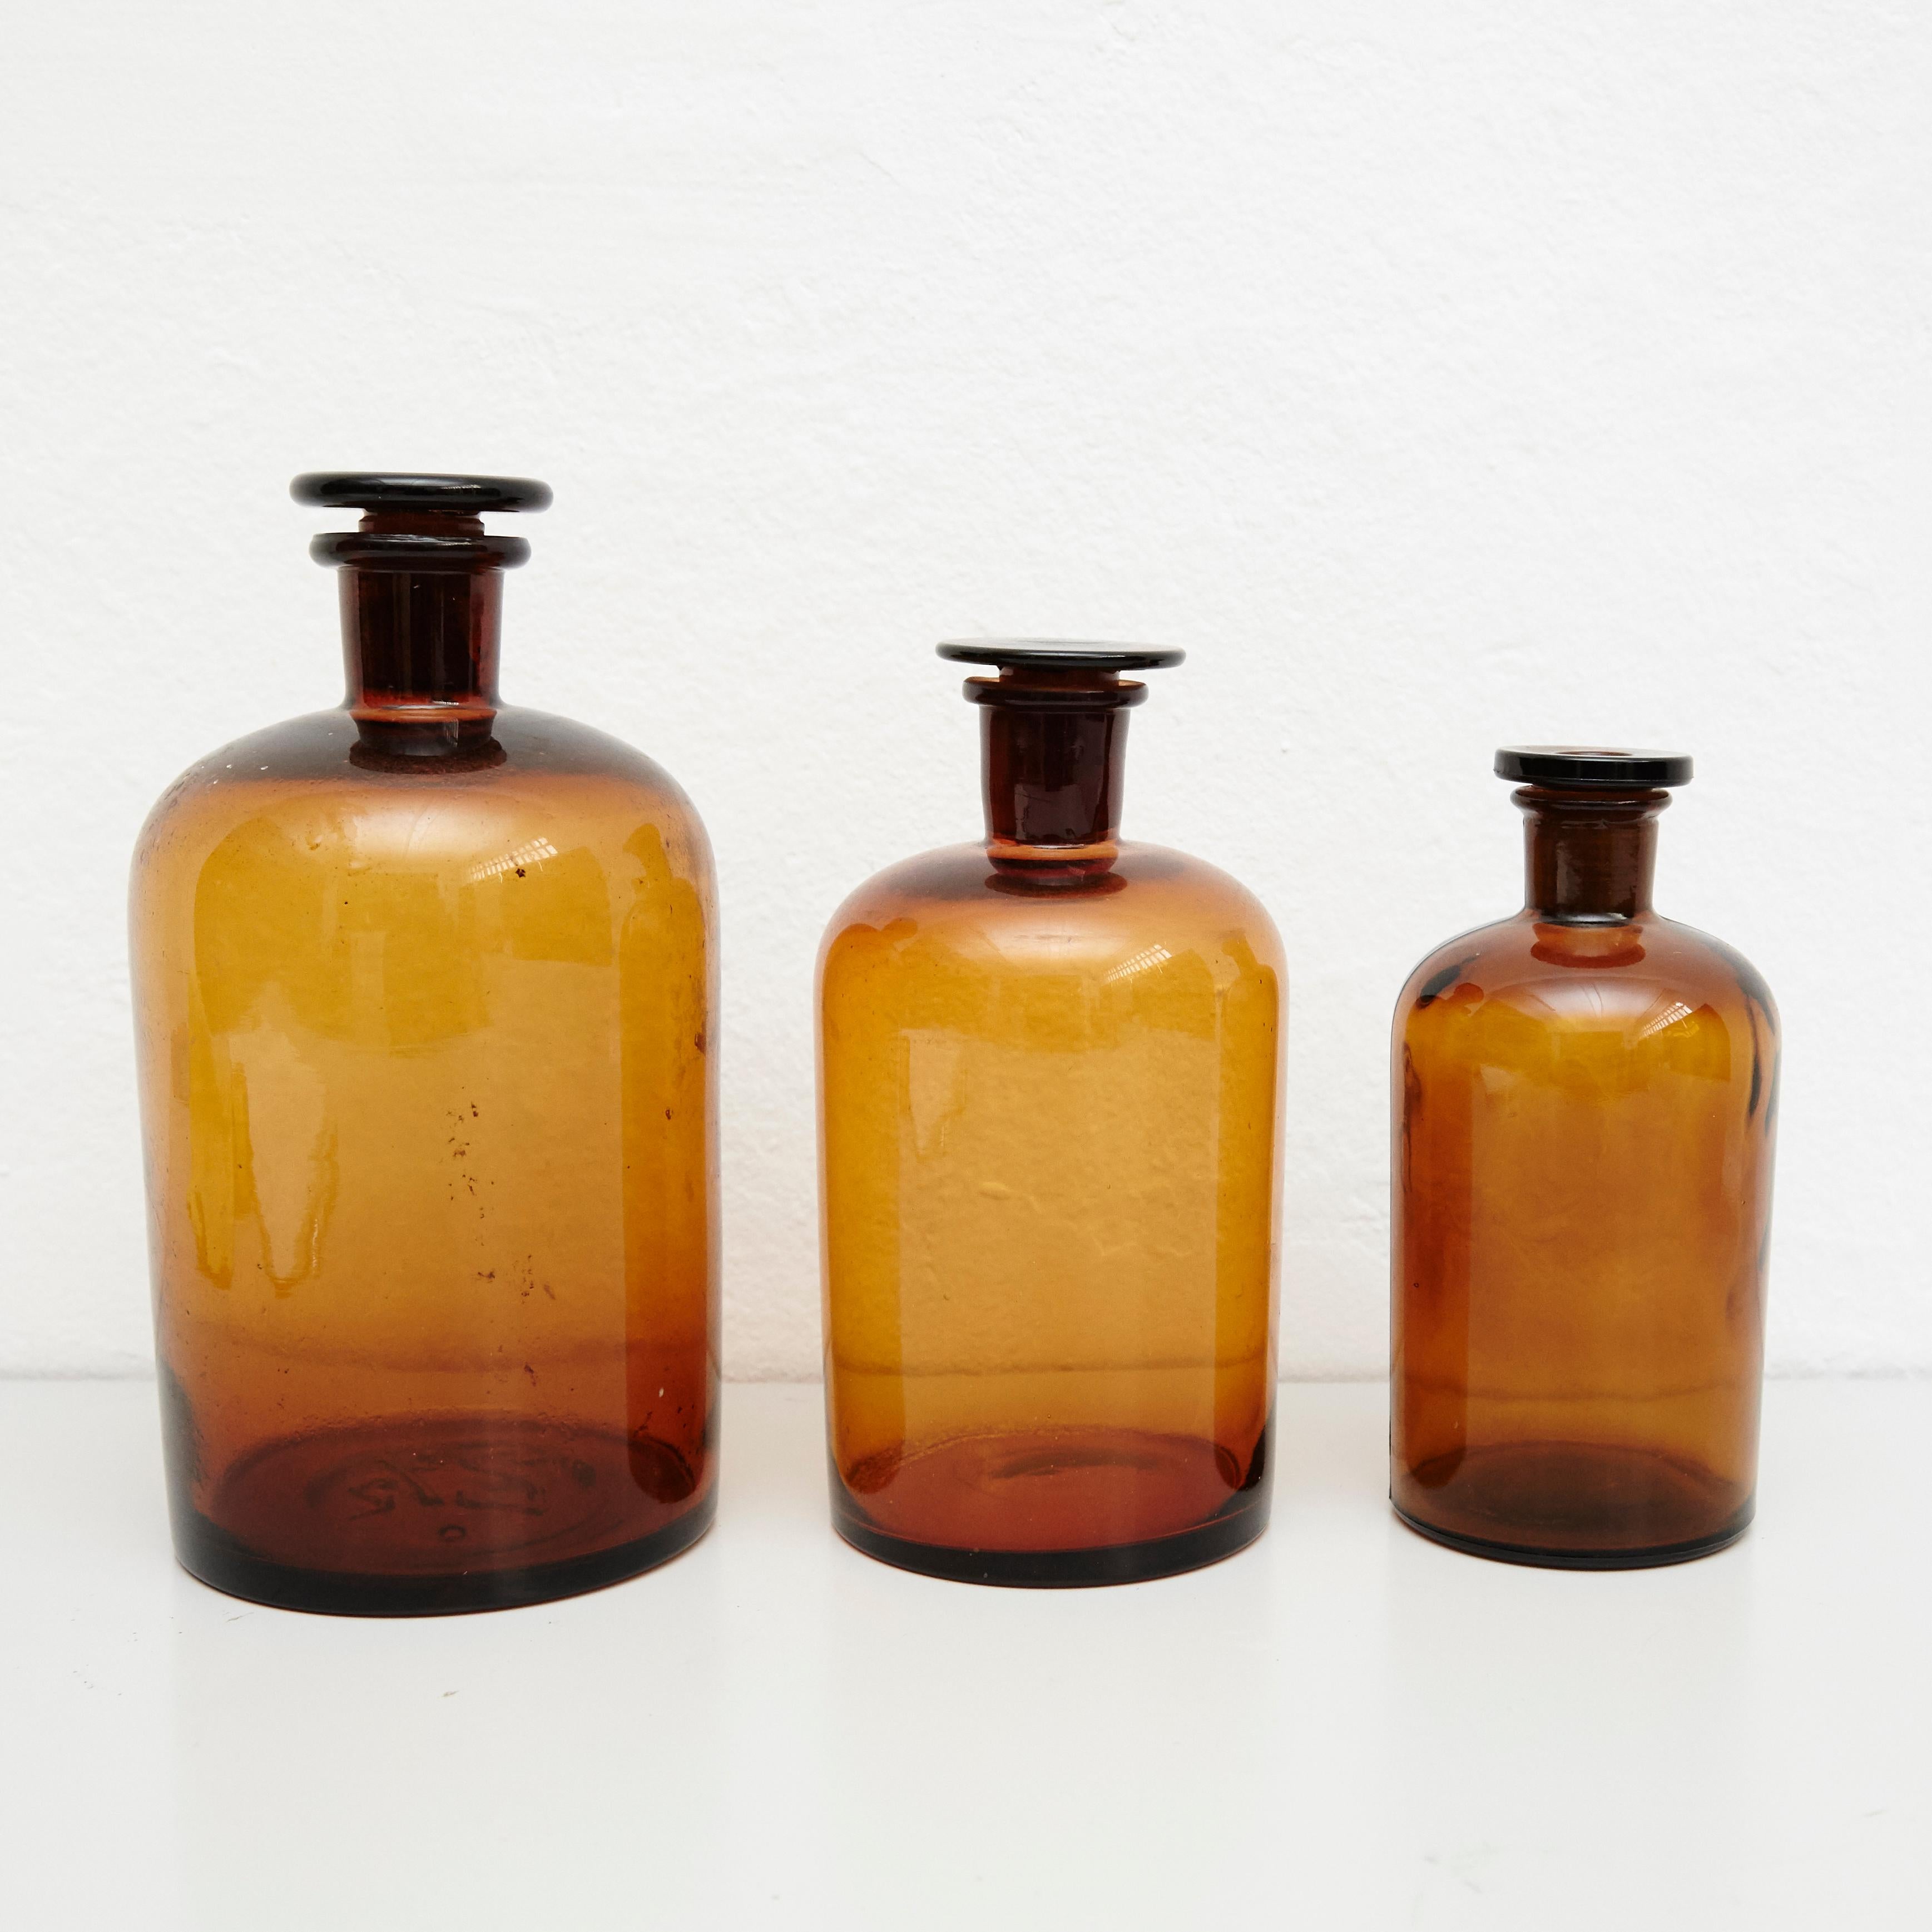 Set of three French vintage amber glass pharmacy bottle.
By unknown manufacturer, France, circa 1930.

In original condition, with minor wear consistent with age and use, preserving a beautiful patina.

Materials:
Amber